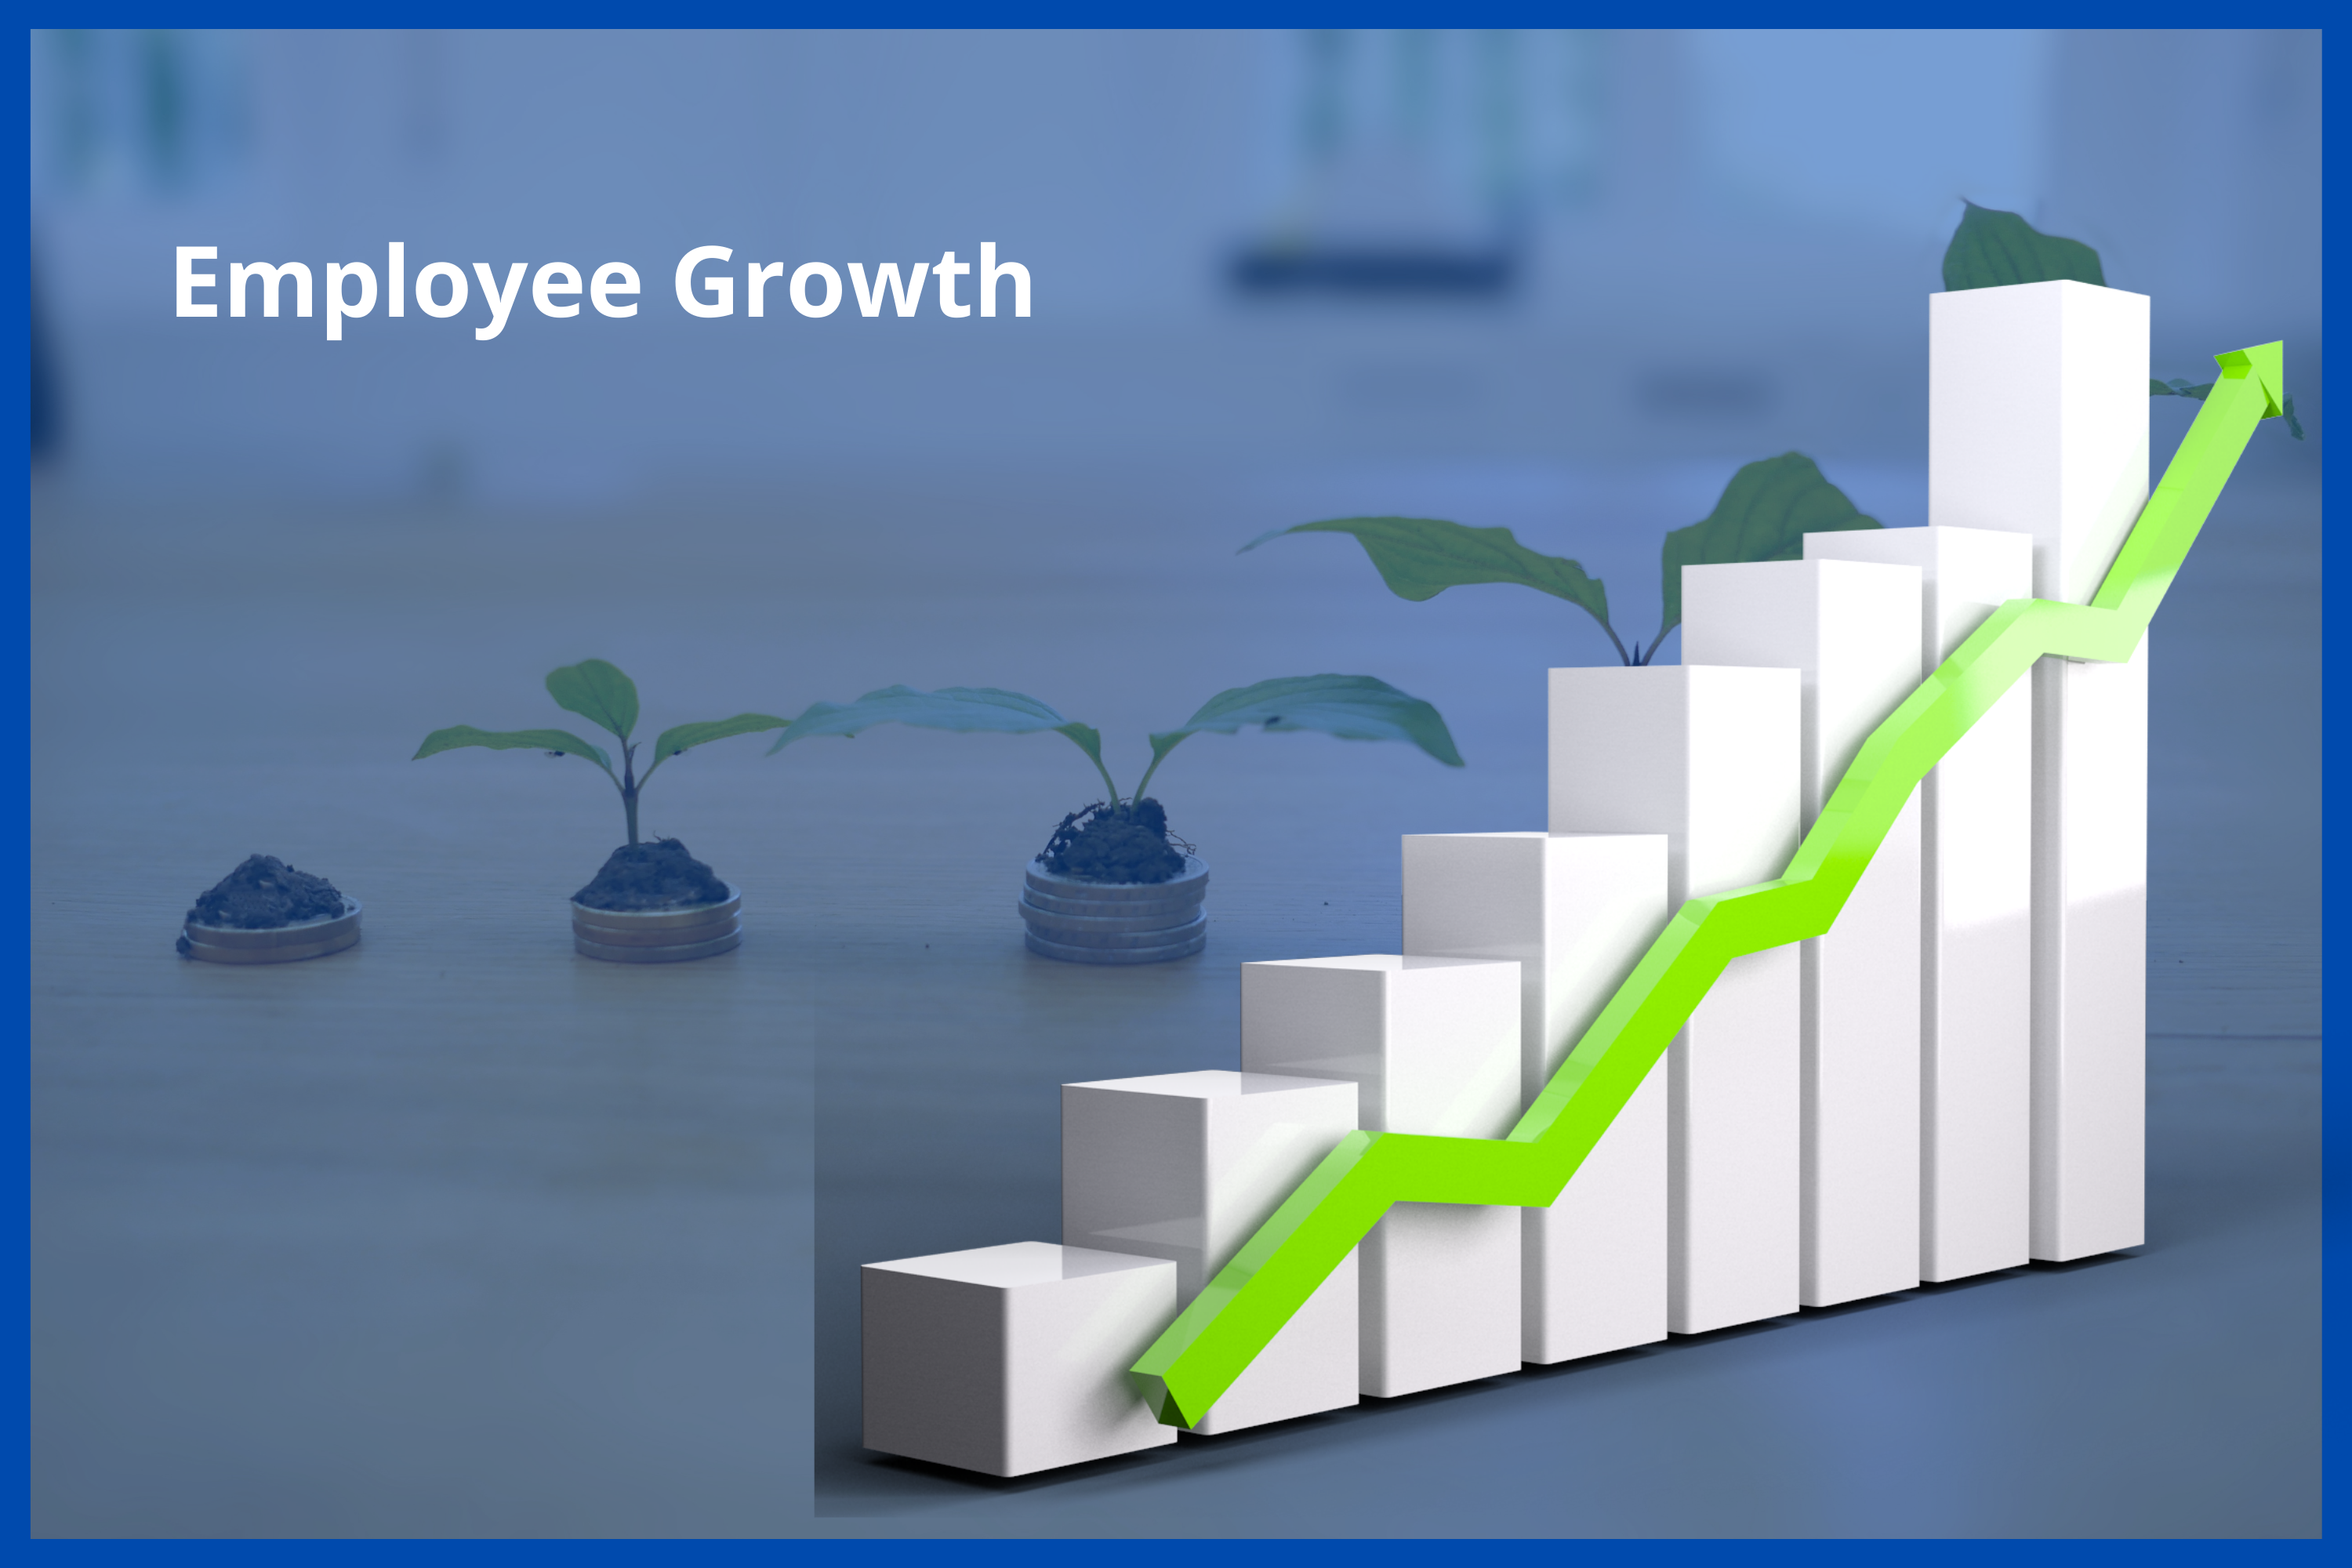 Employee Development is more important for HR managers.